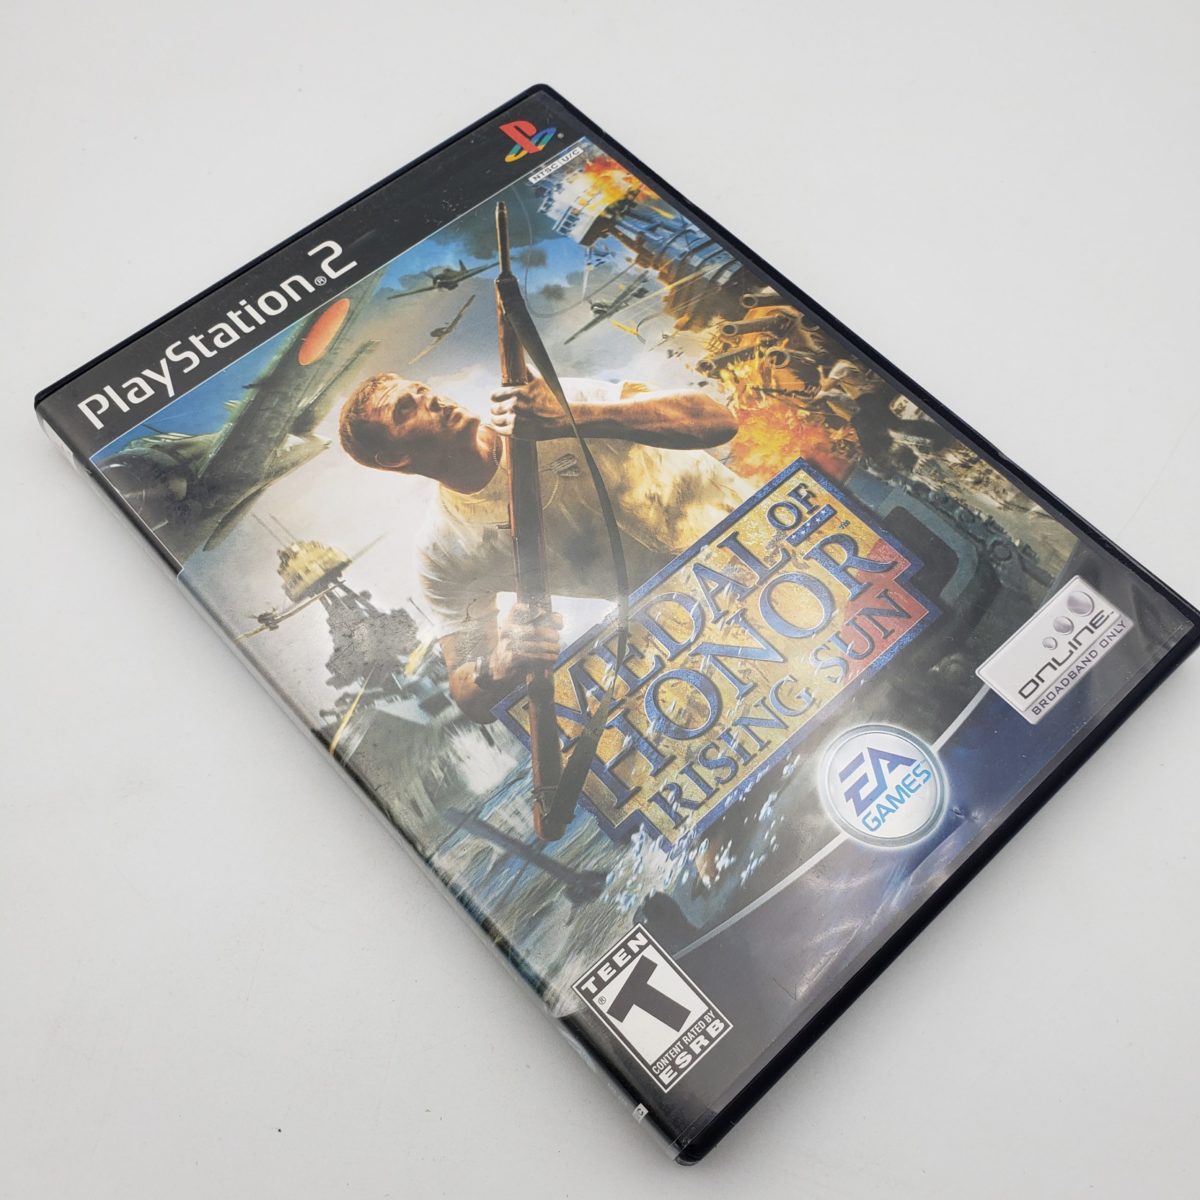 medal of honor rising sun pc buying